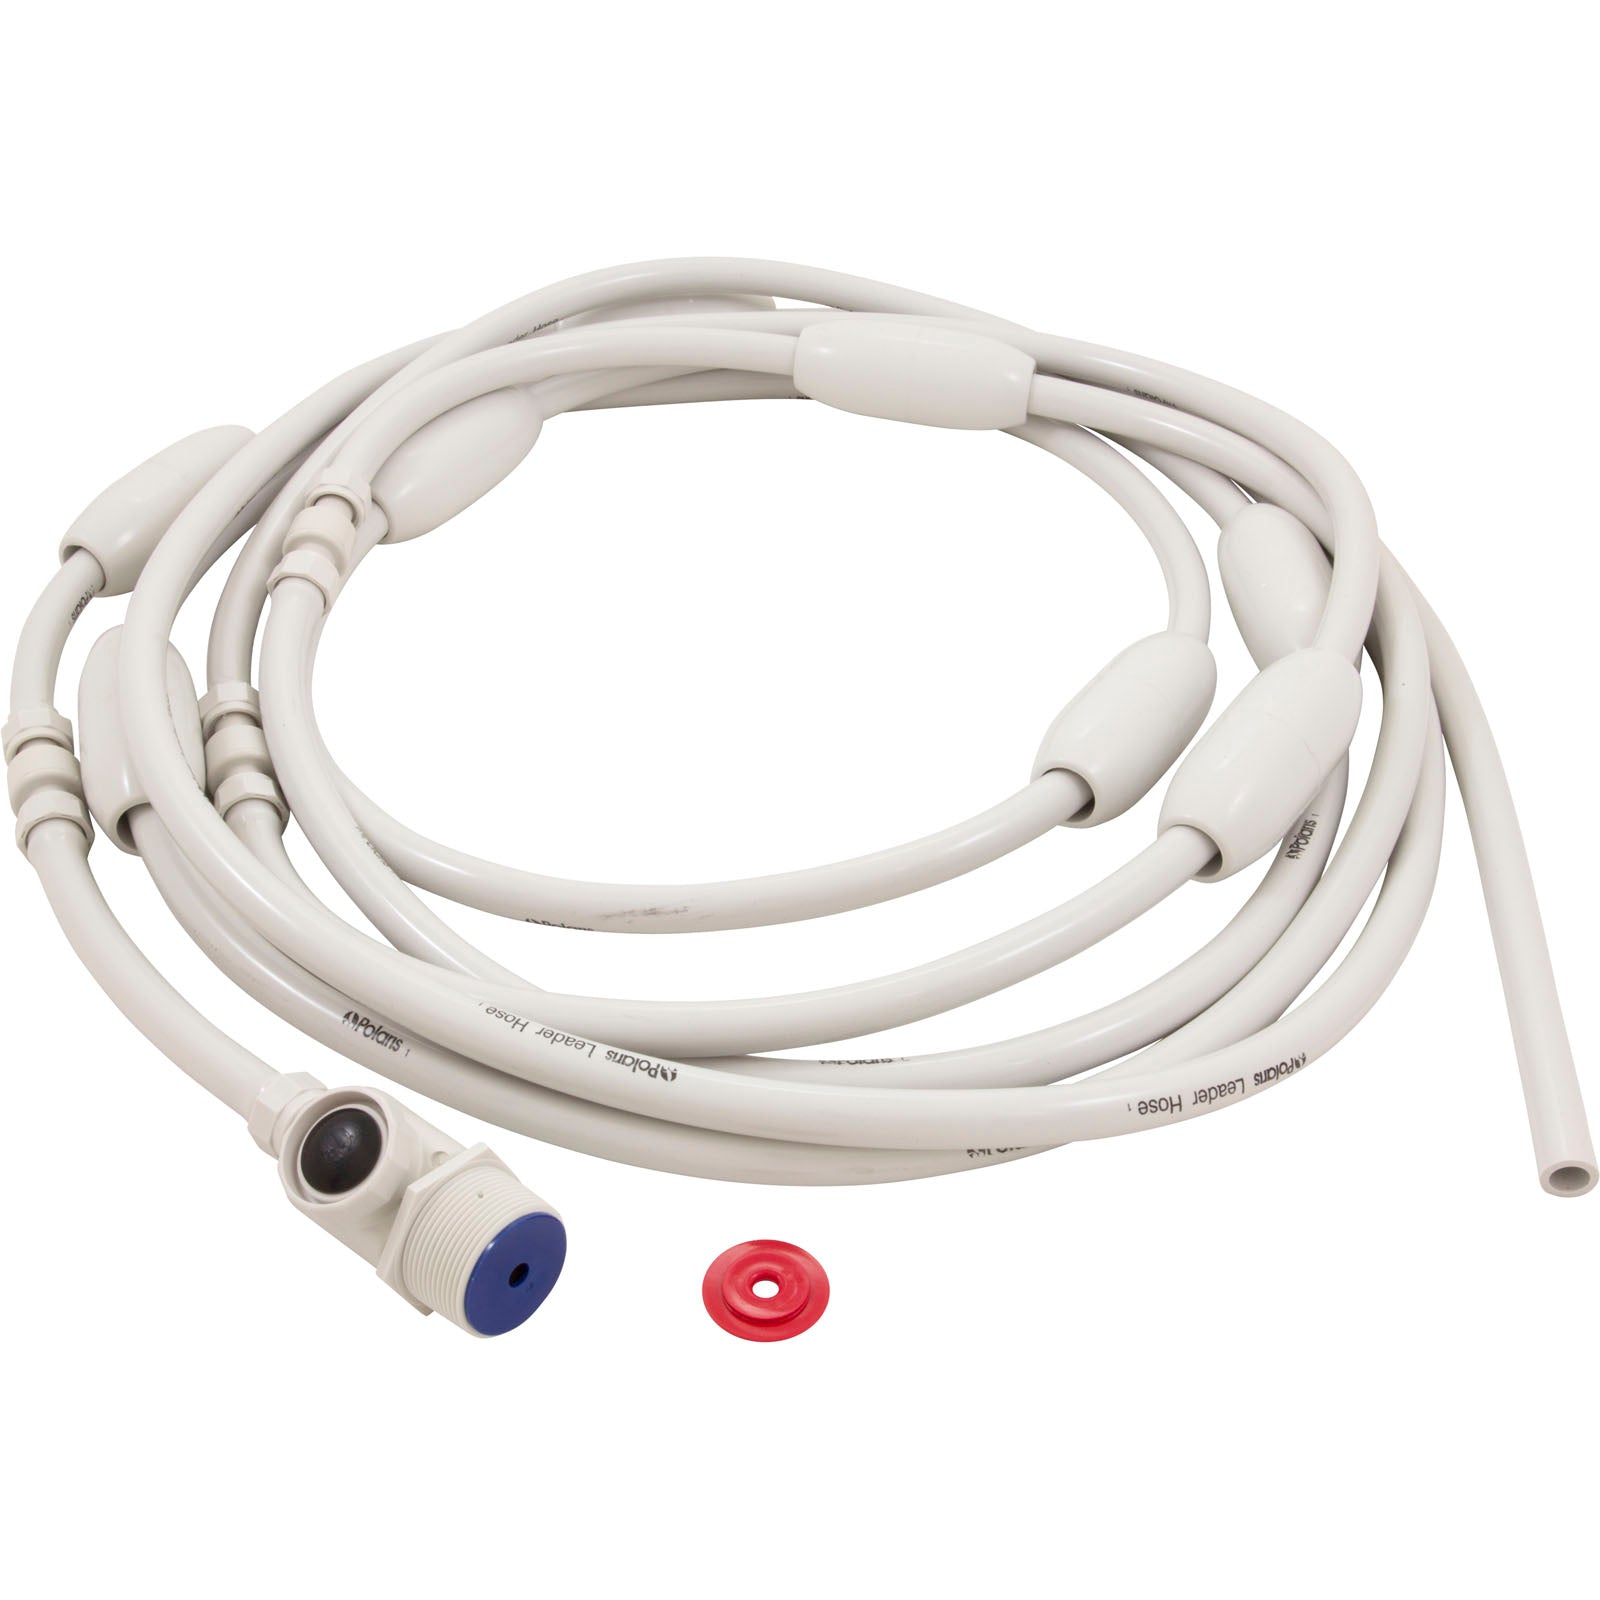 Zodiac/Polaris G5 Complete Feed Hose Kit with Wall Fitting for Pool Cleaners